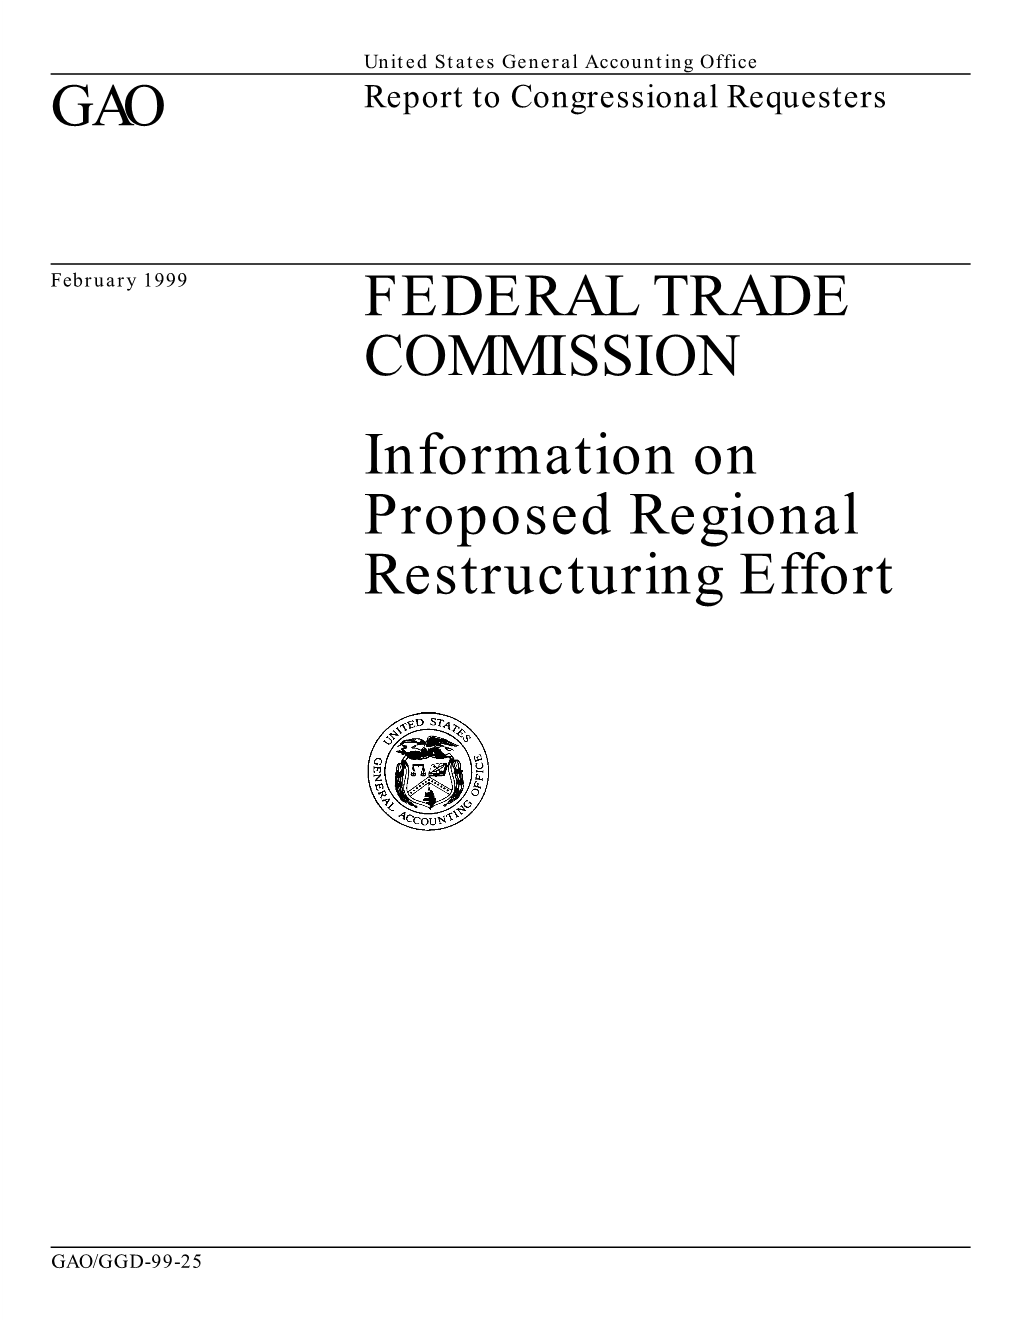 GGD-99-25 Federal Trade Commission